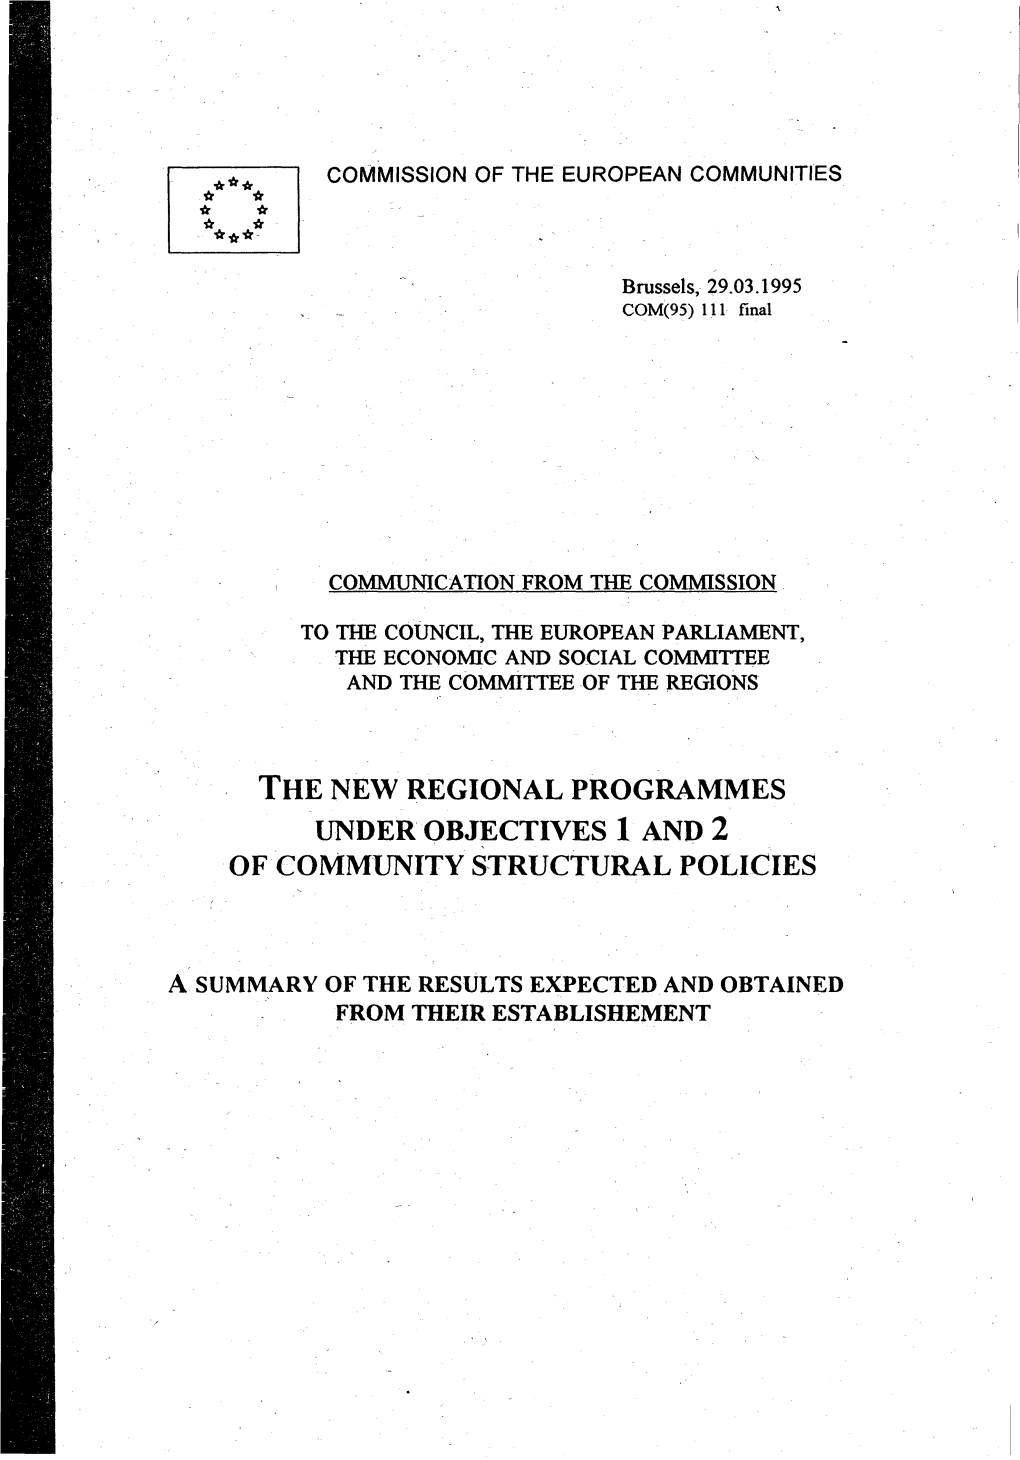 The New Regional Programmes Under Objectives 1 and 2 of Community Structural Policies